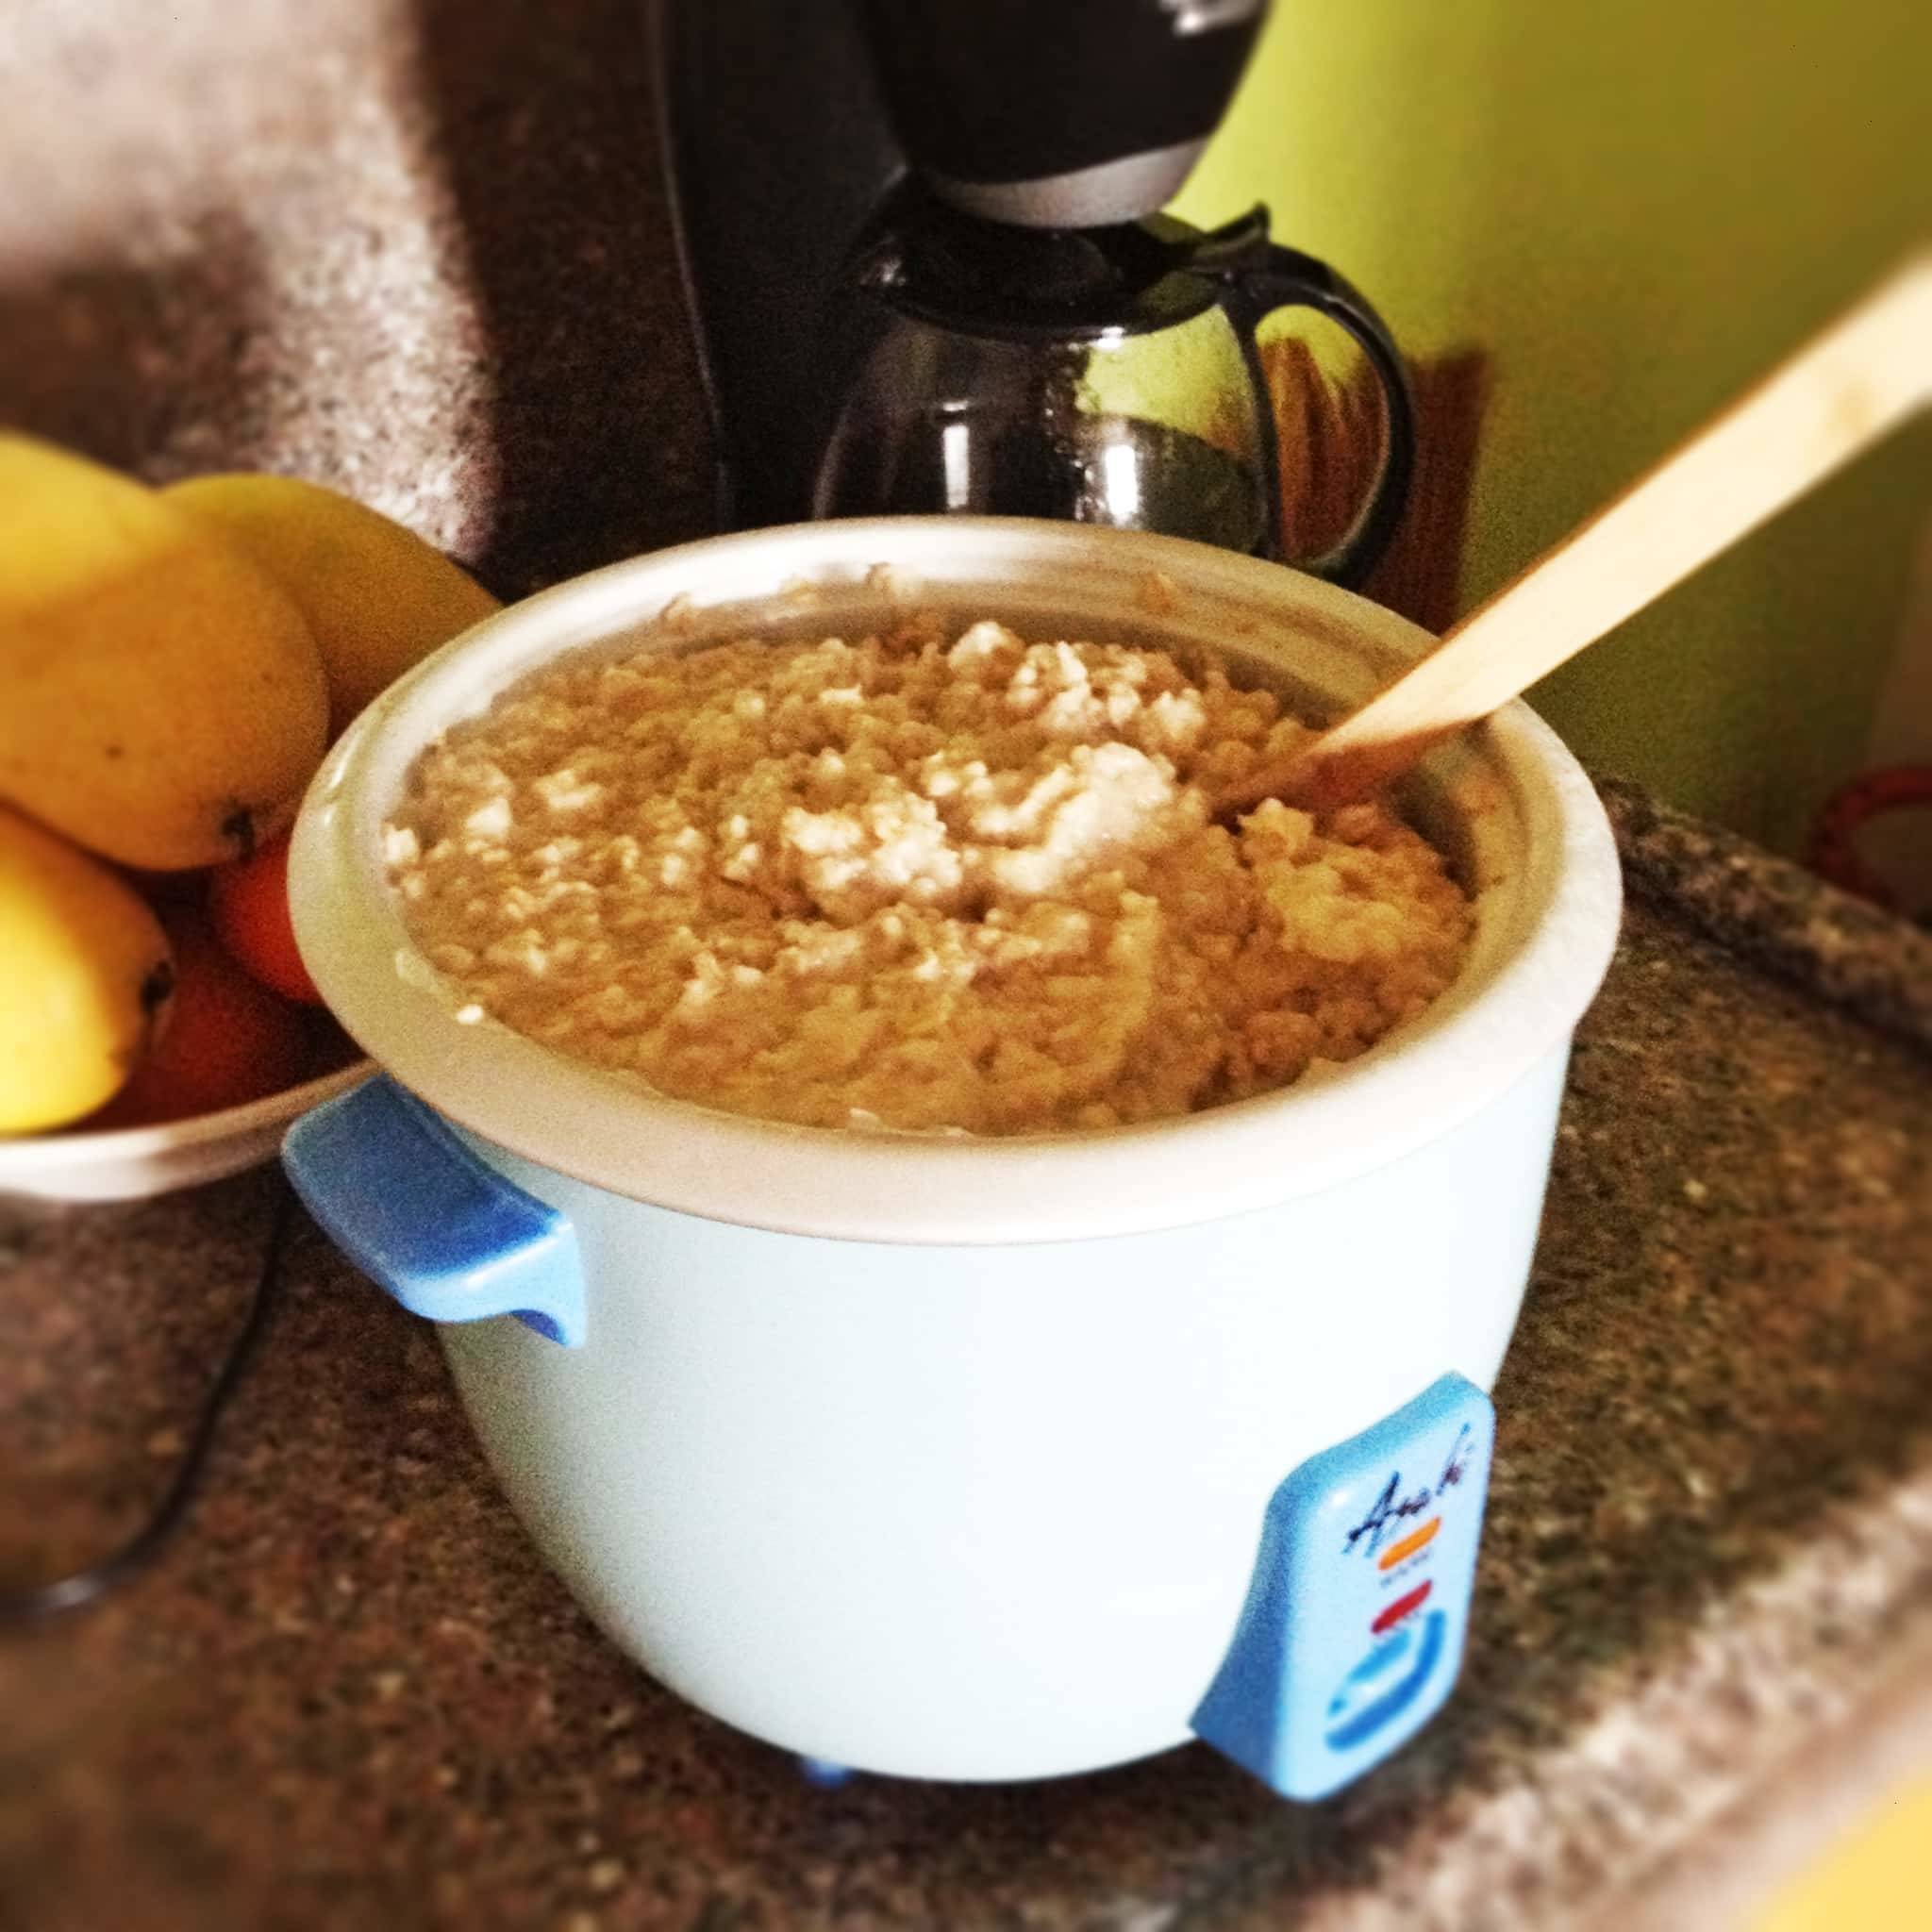 Oatmeal cooking with a wooden spoon.